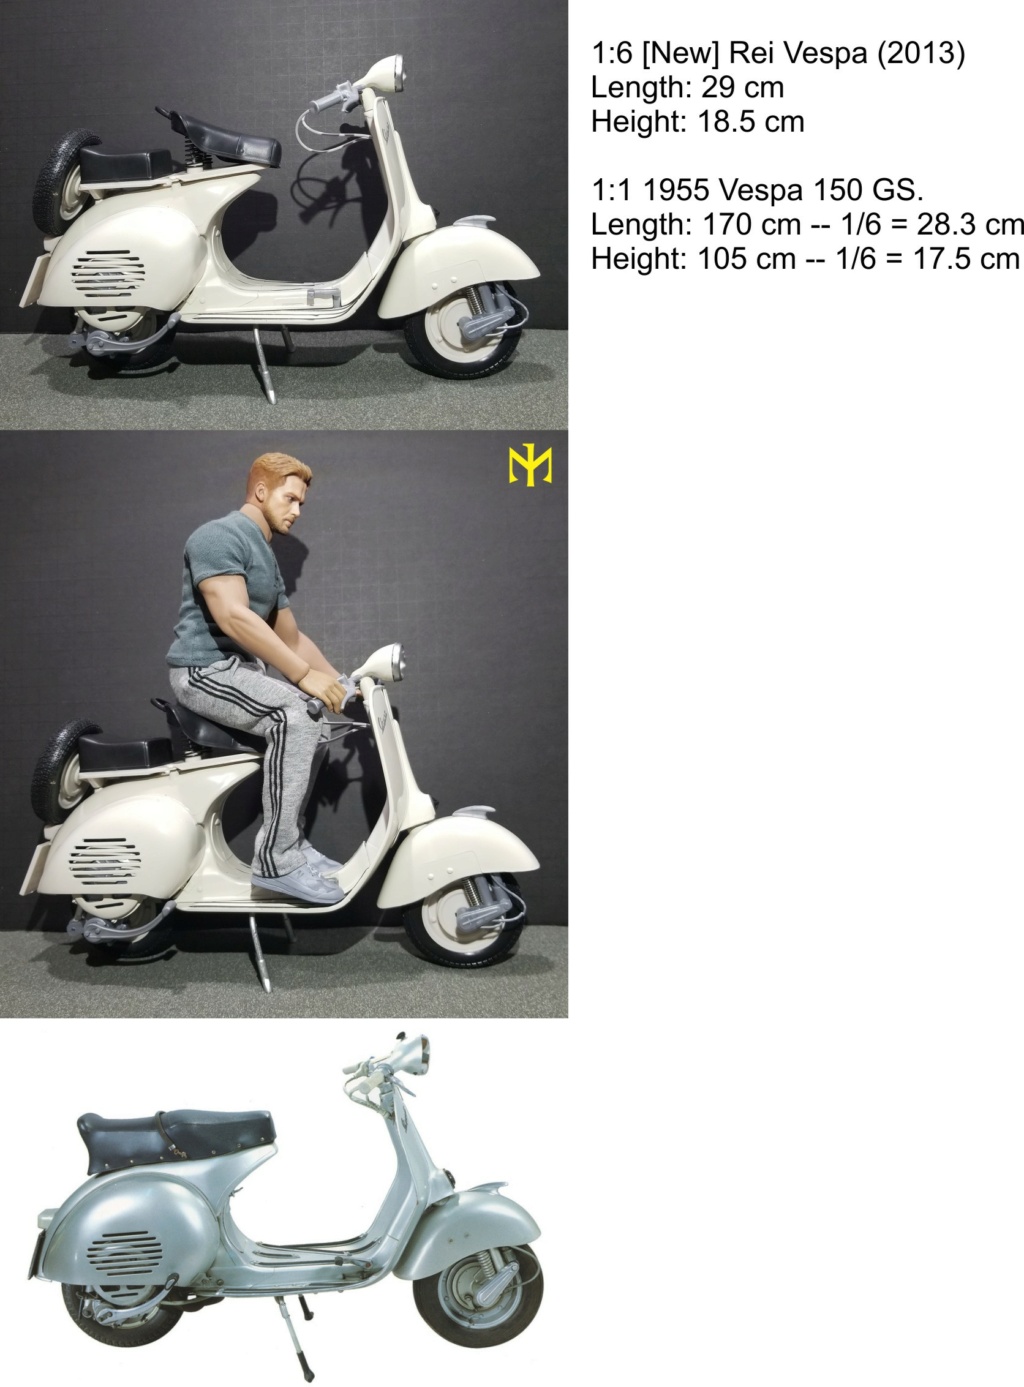 1/6 Scale Motorcyles & 1/1 Motorcycles -- Size & Design -- Problems for 1/6 scale - Page 2 Moto0710